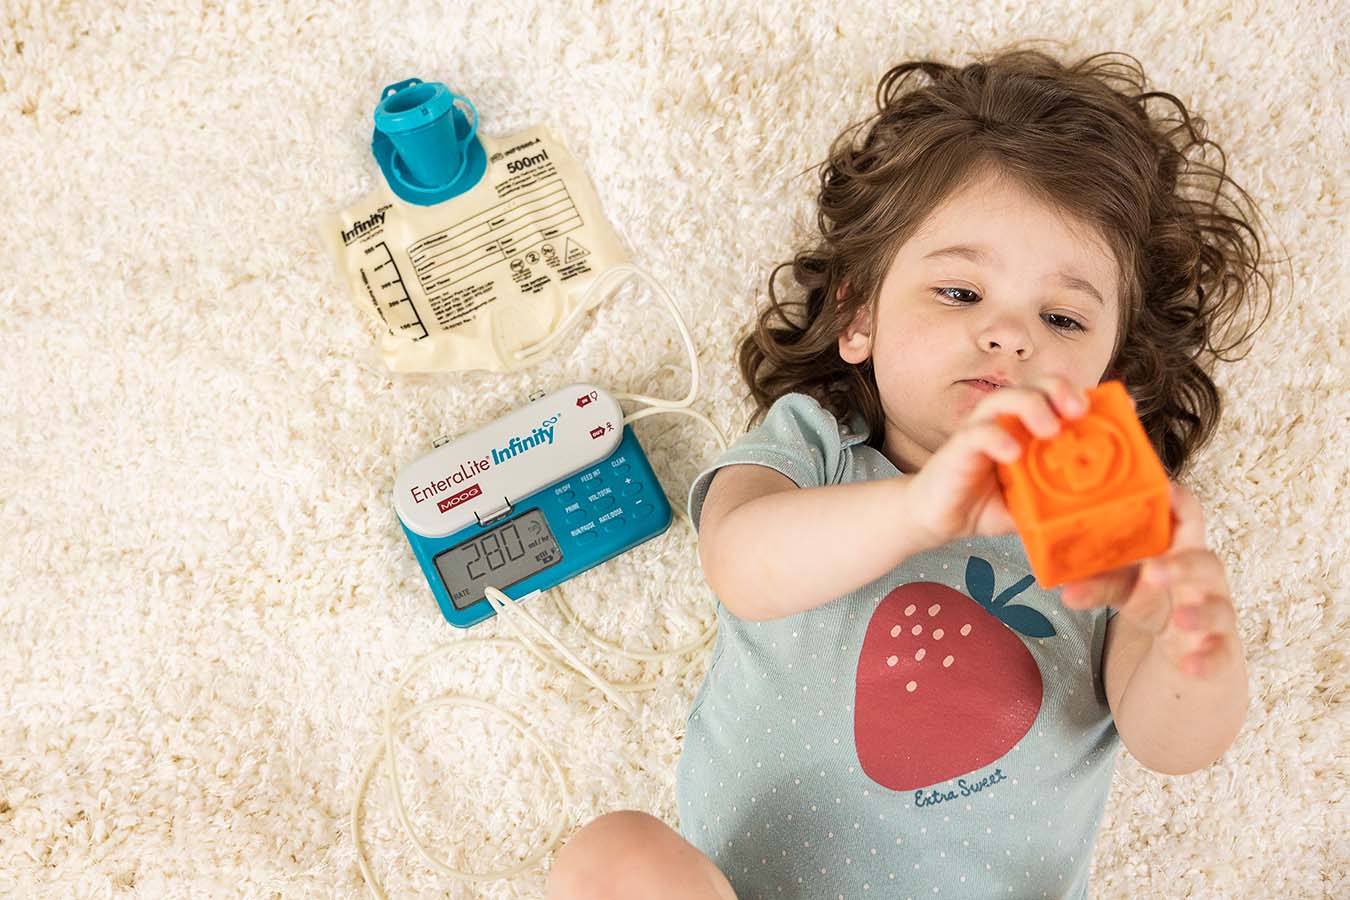 A toddler lays on the ground and plays with a block